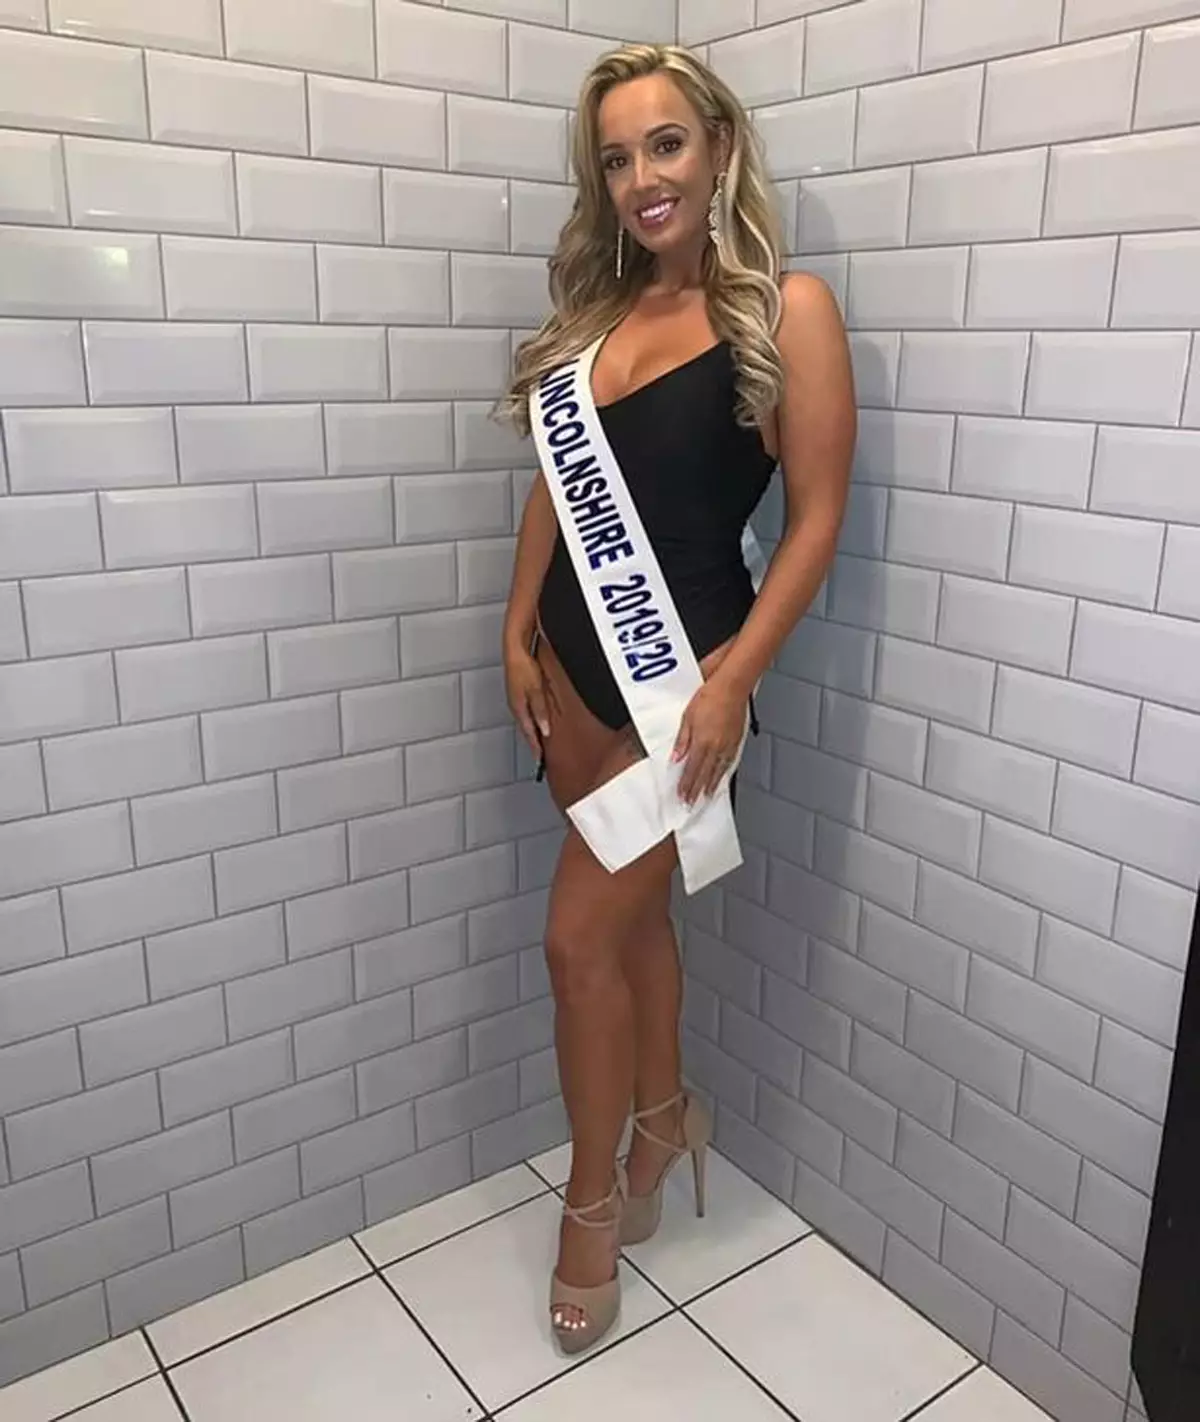 Jen Atkin has been named the 75th Miss Great Britain.